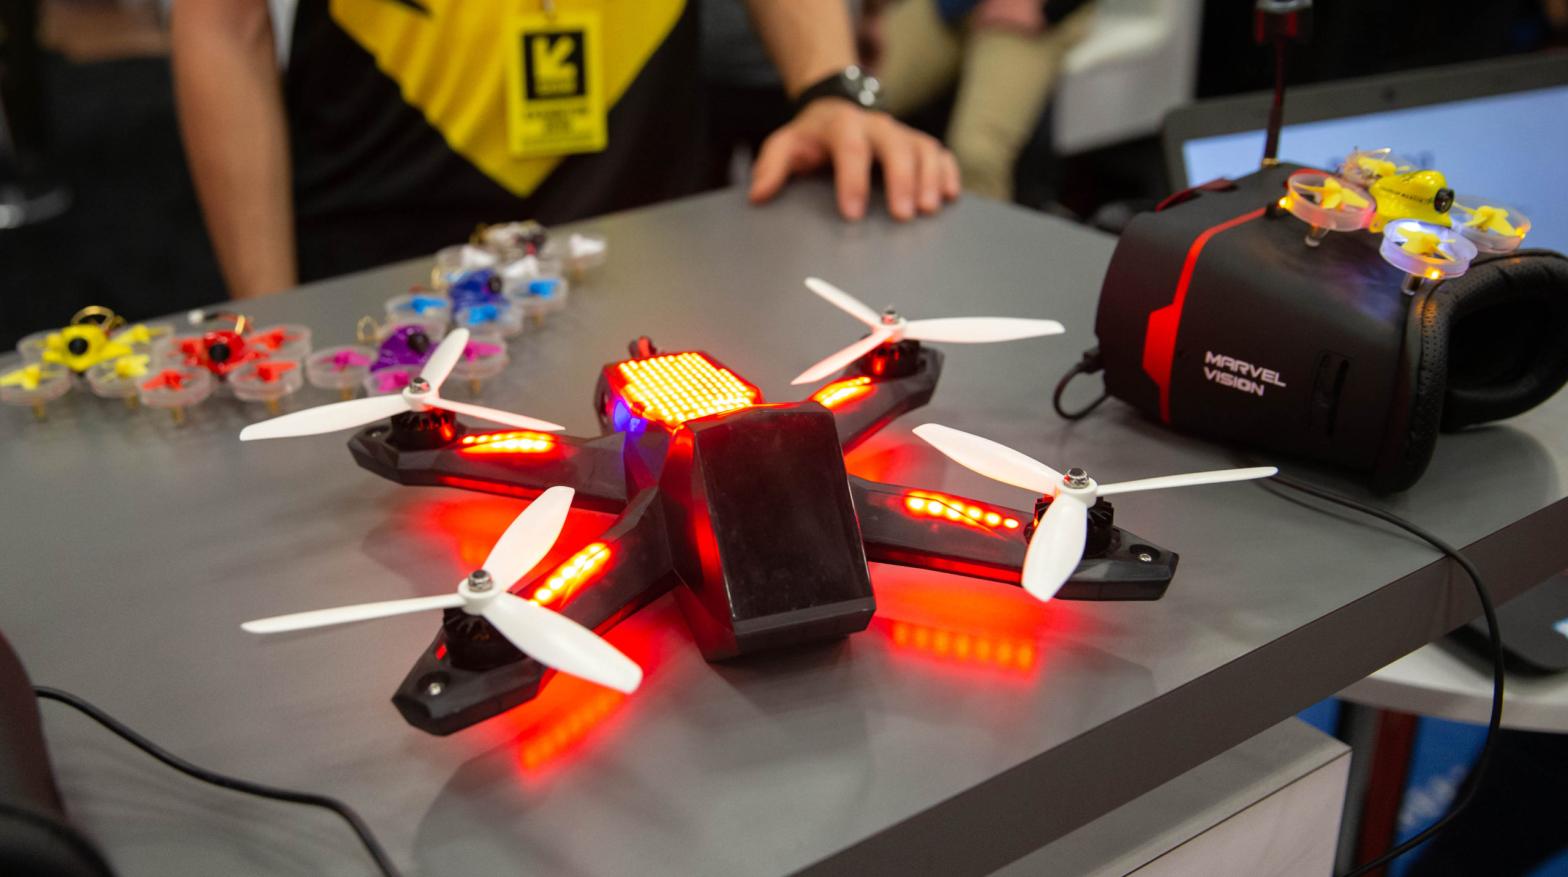 Lockheed Martin drones are on display during the 2019 SXSW Trade Show on March 12, 2019 in Austin, Texas. The company partnered with The Drone Racing League (DRL) on the AlphaPilot Innovation Challenge, challenging teams of students, coders and technologists to develop, test and race high-speed, self-flying drones. (Photo: Suzanne Cordeiro, Getty Images)